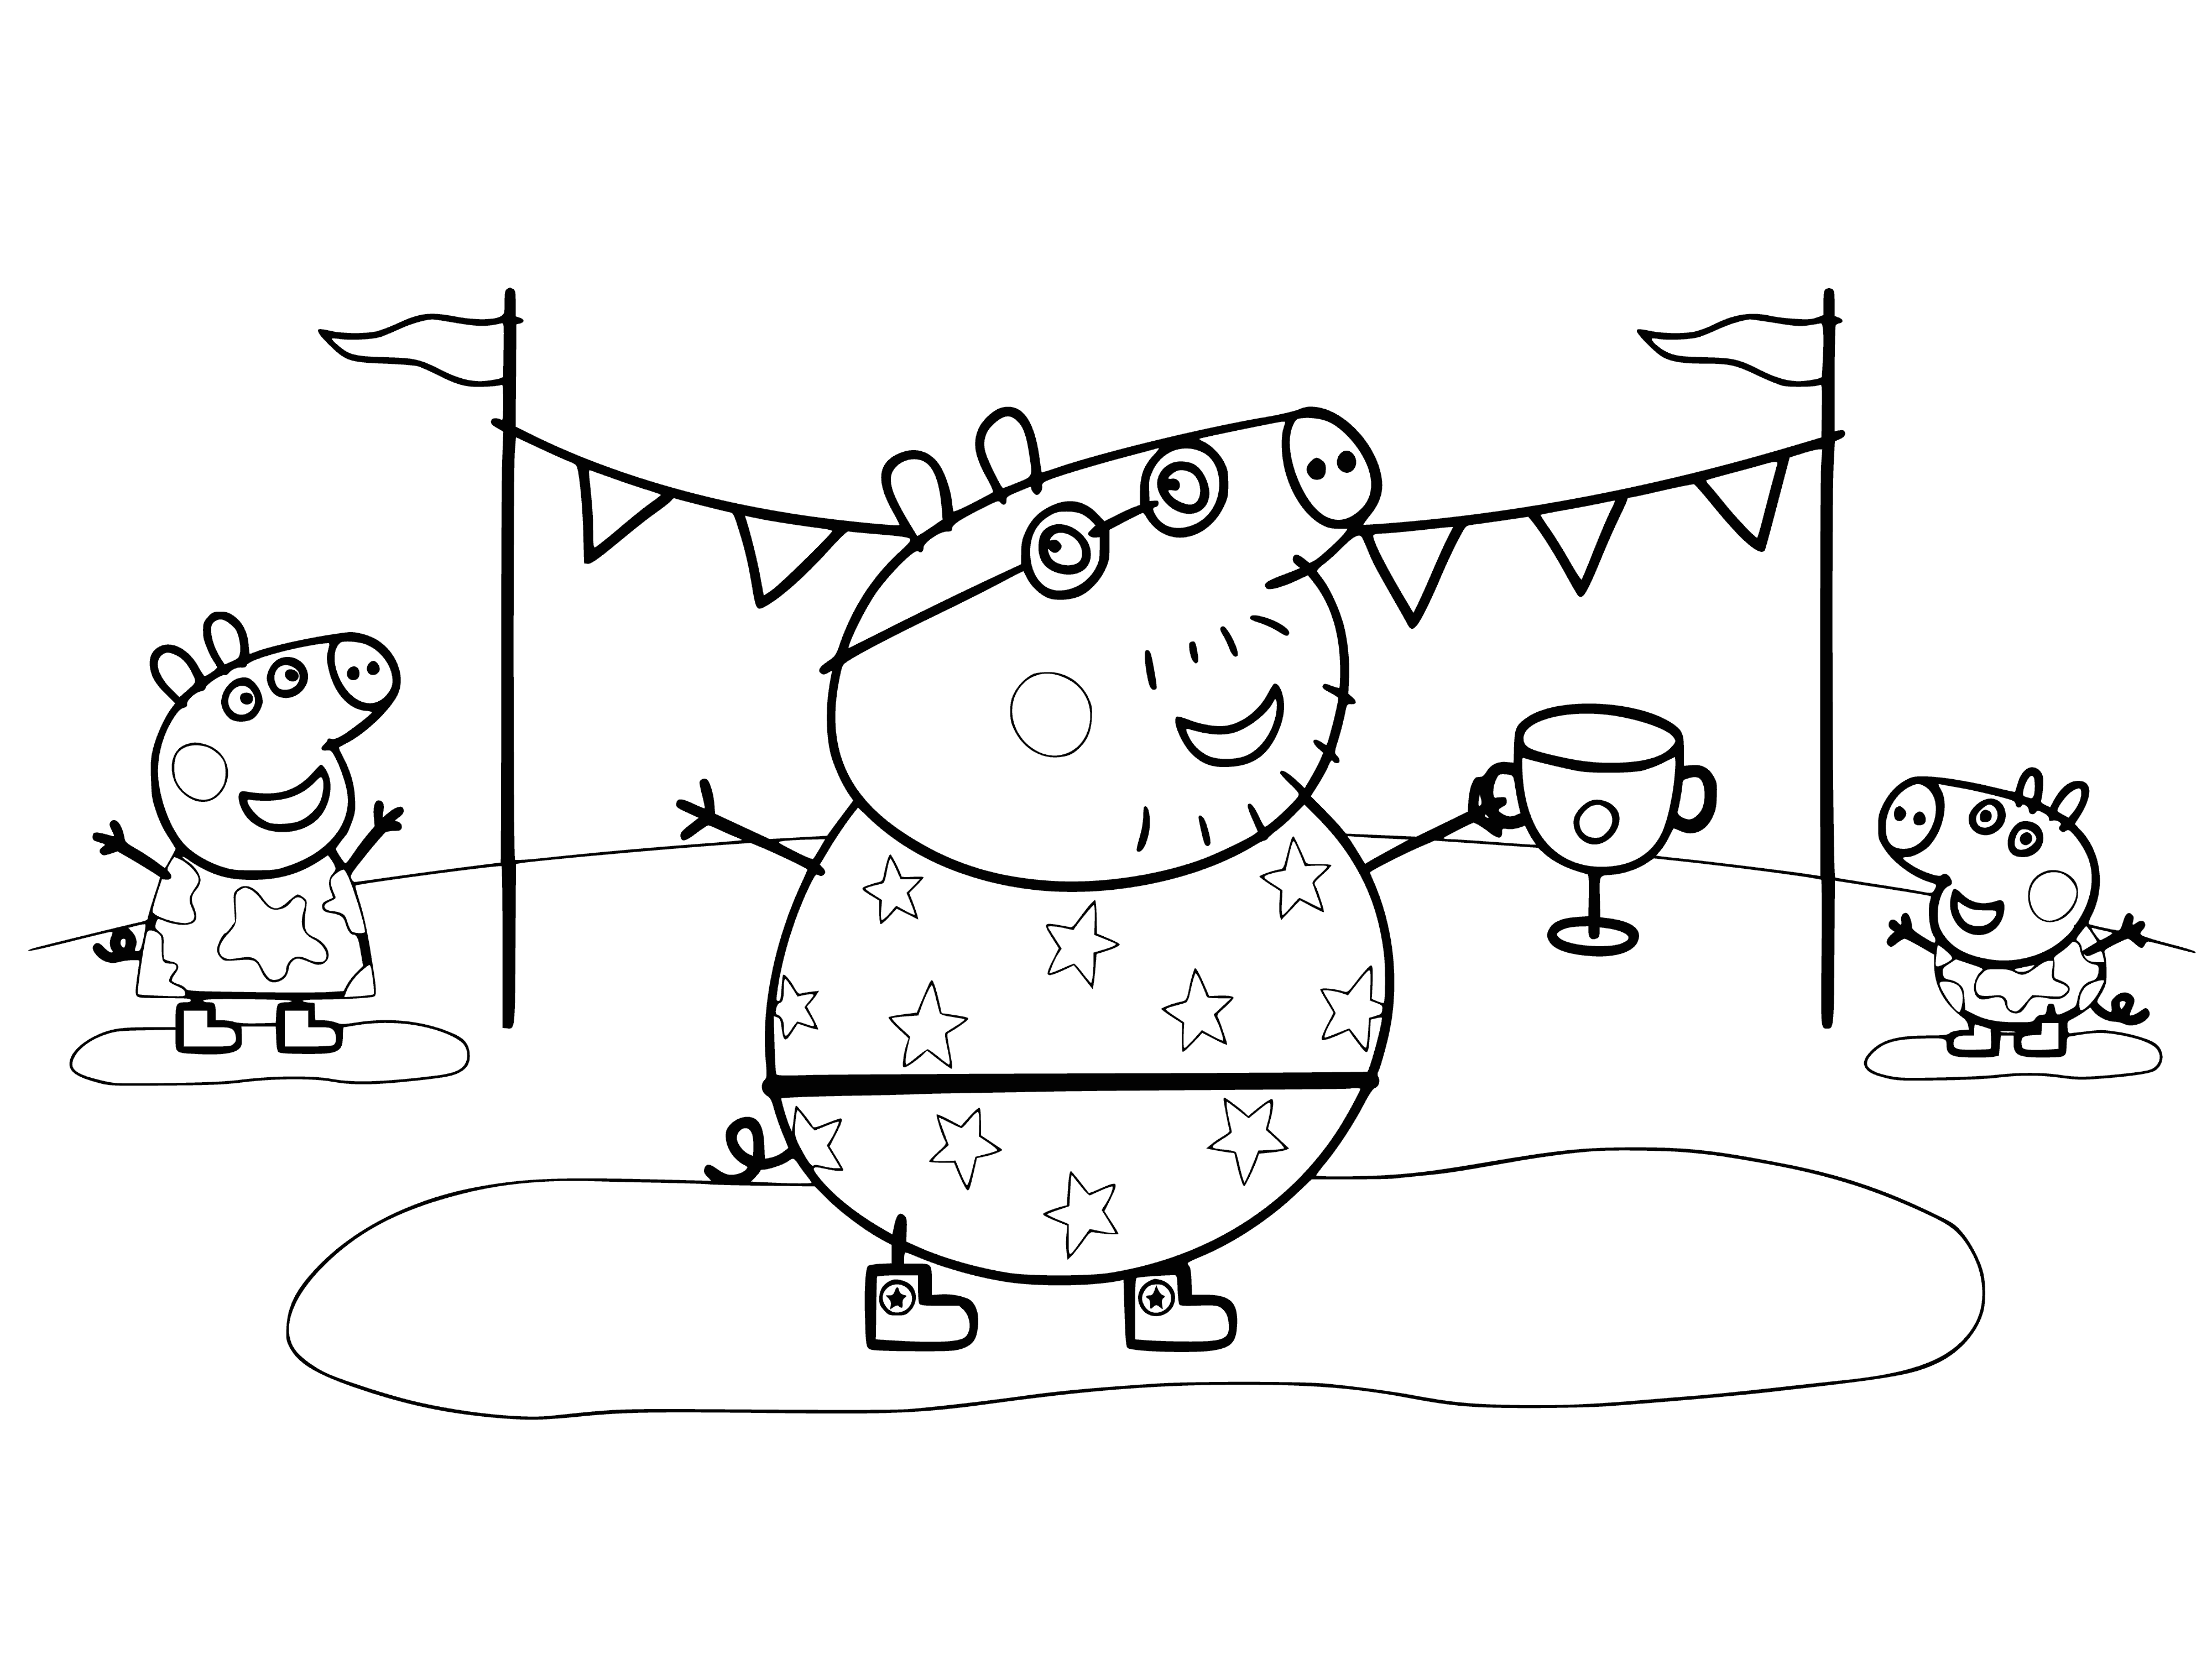 coloring page: Coloring competition of Peppa Pig surrounded by colored hearts; "Competition" at bottom of page.